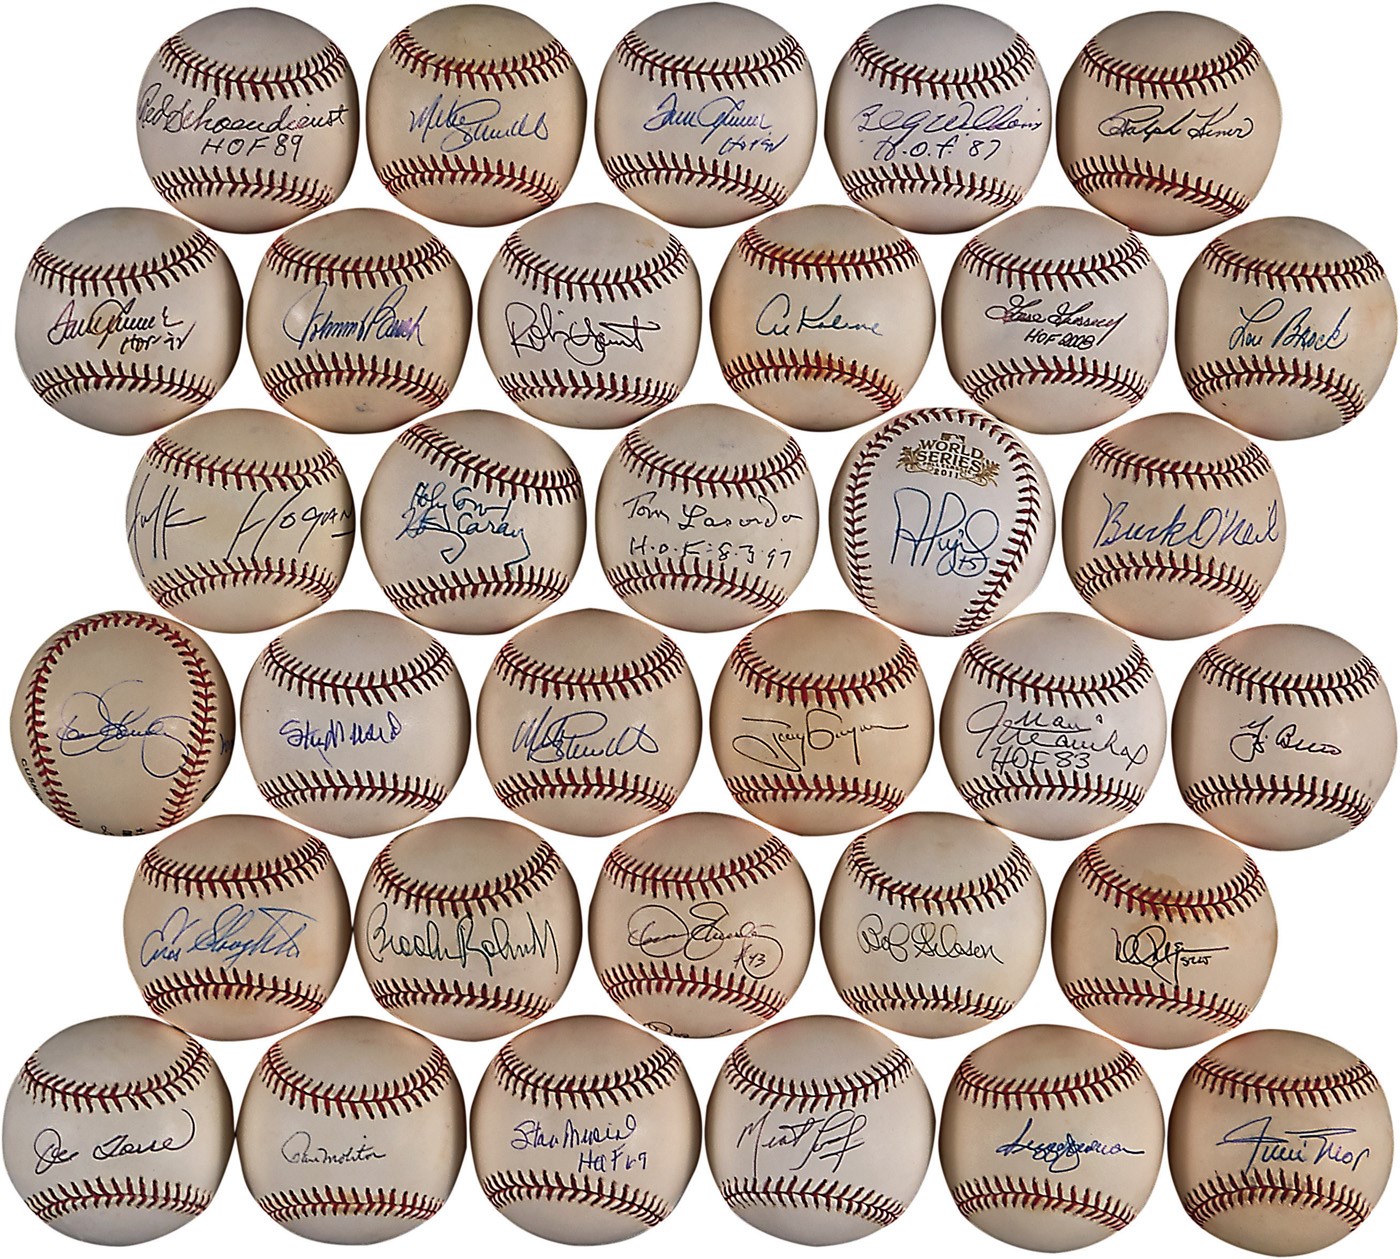 St. Louis Cardinals - Large Collection of Single-Signed Baseballs From The Mike Shannon Collection (149)